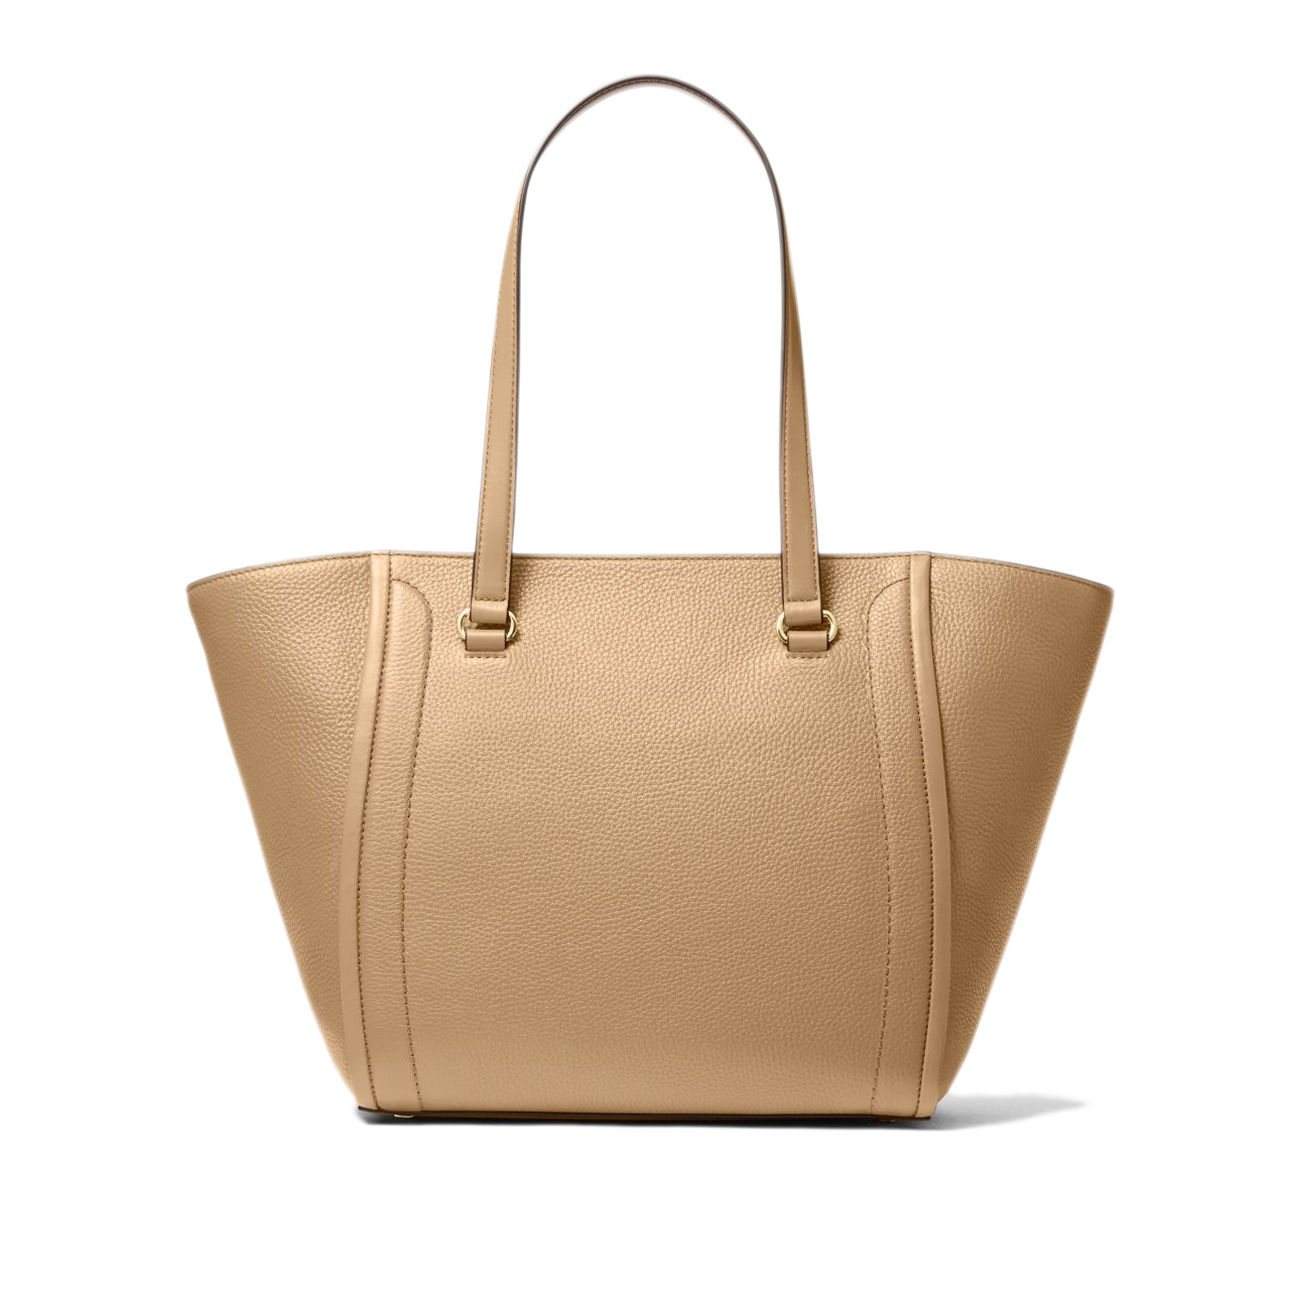 MICHAEL KORS TOTE BAG IN HAMMERED LEATHER Woman Camel | Mascheroni Store